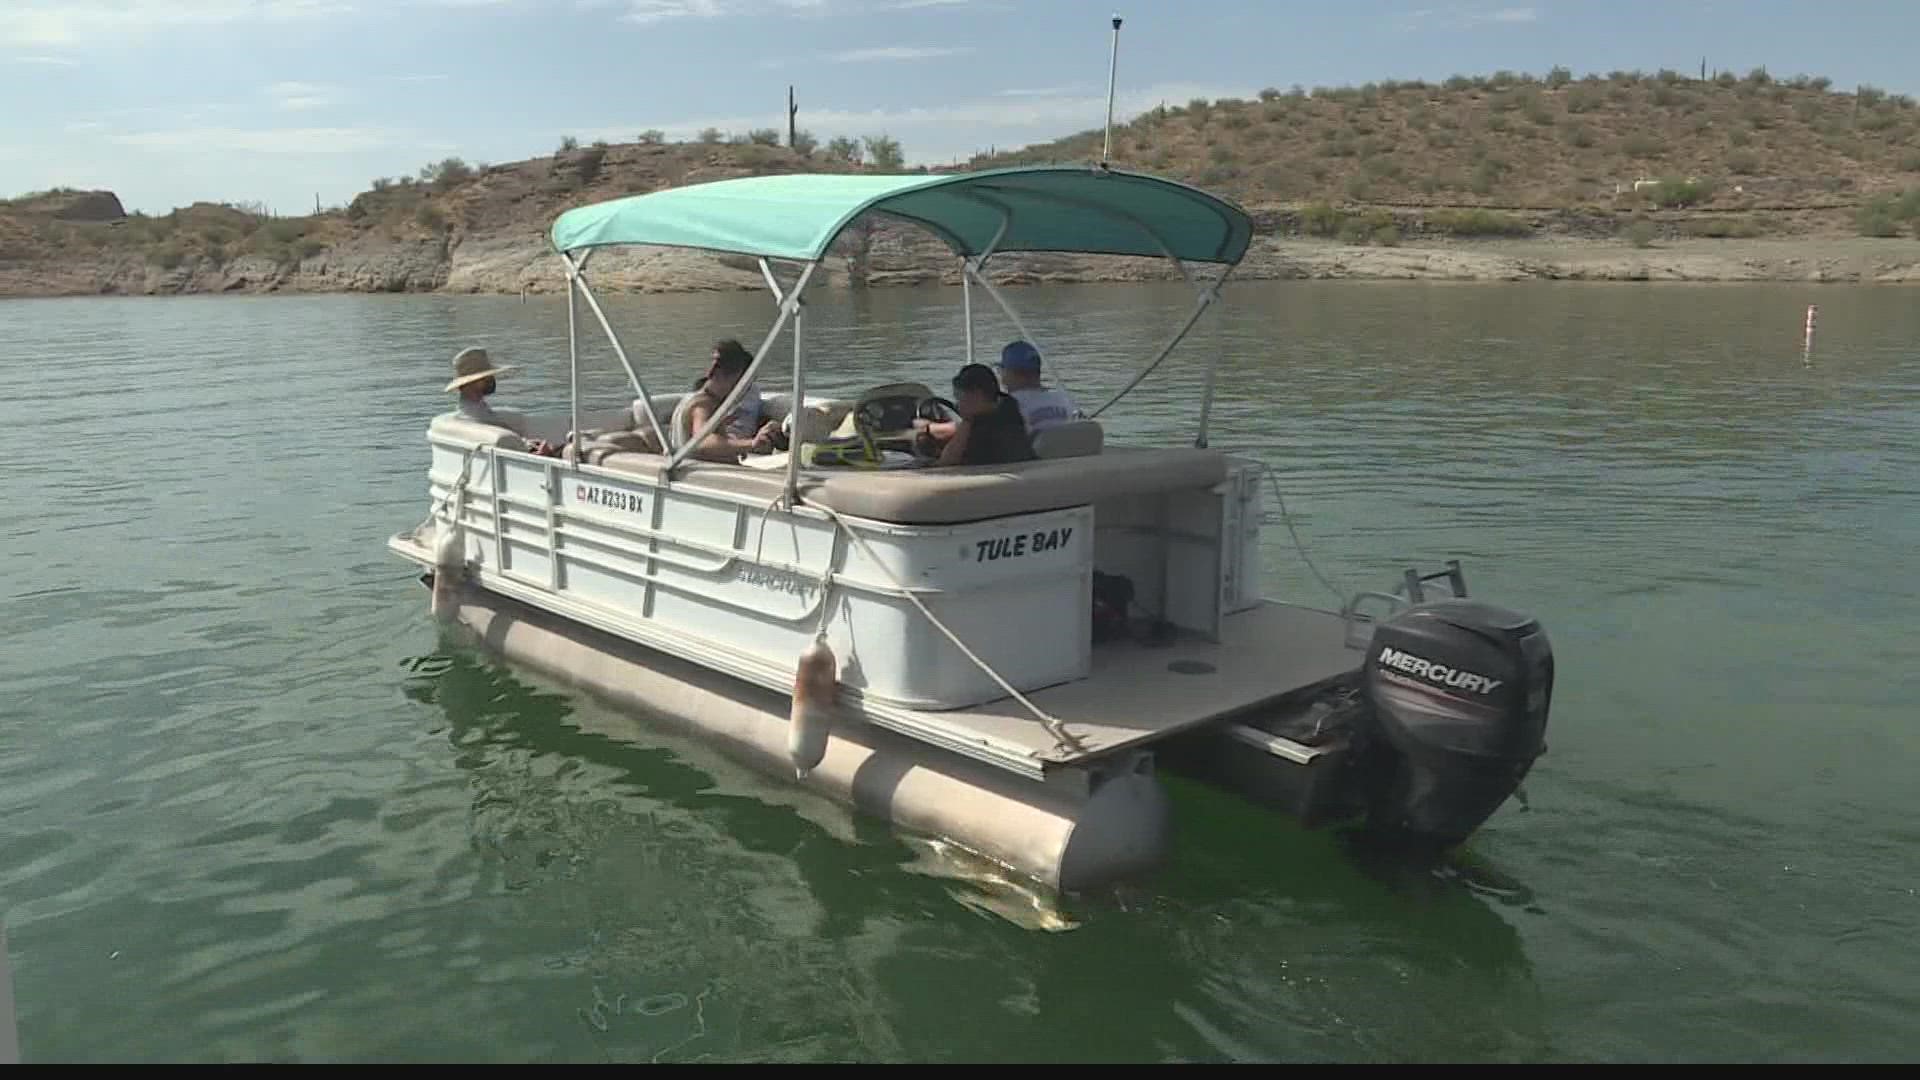 For the fifth weekend in a row, someone has lost their life at Lake Pleasant. Lake officials offer tips on how to stay safe on Arizona's lakes.